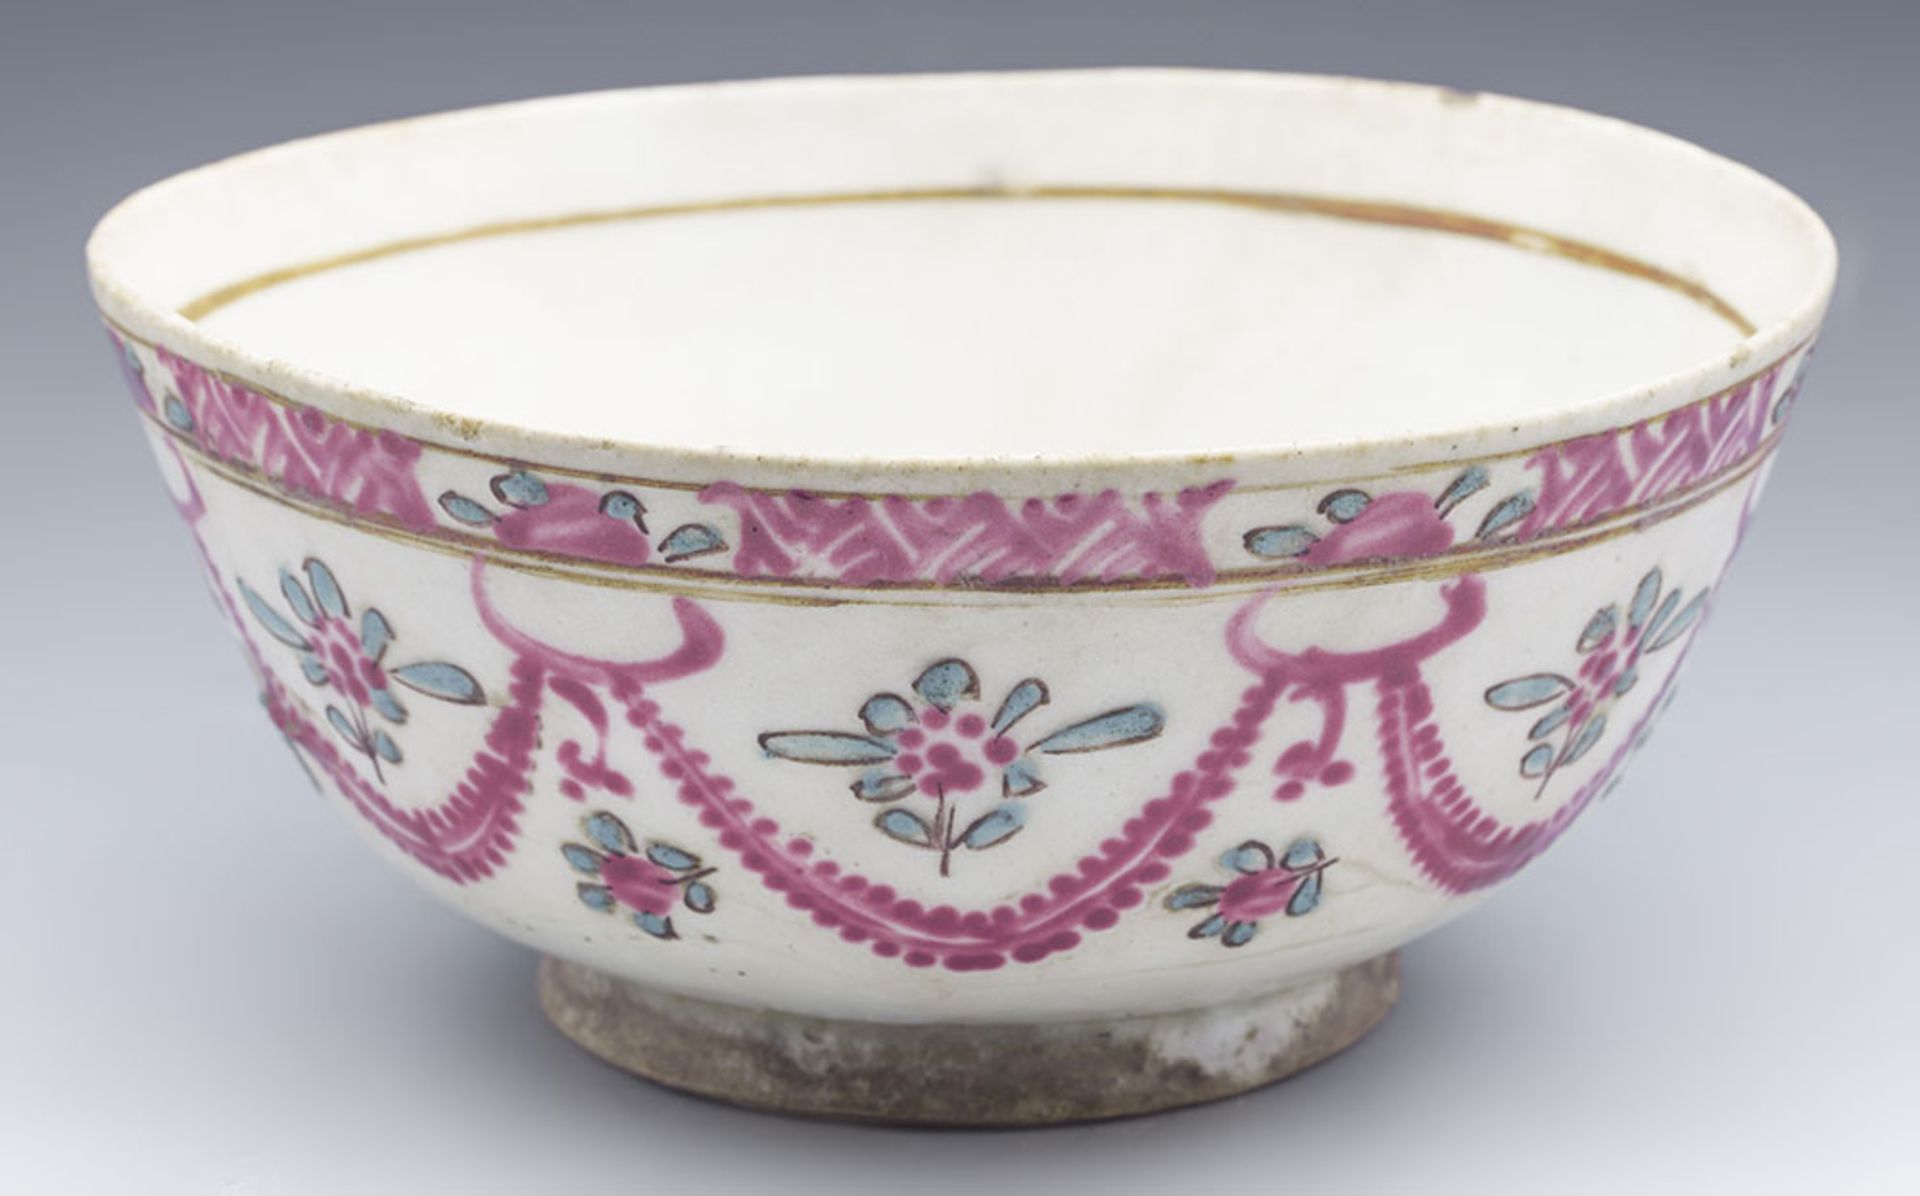 ANTIQUE MIDDLE EASTERN BOWL WITH FLORAL GARLANDS 17/18TH C. - Image 6 of 12